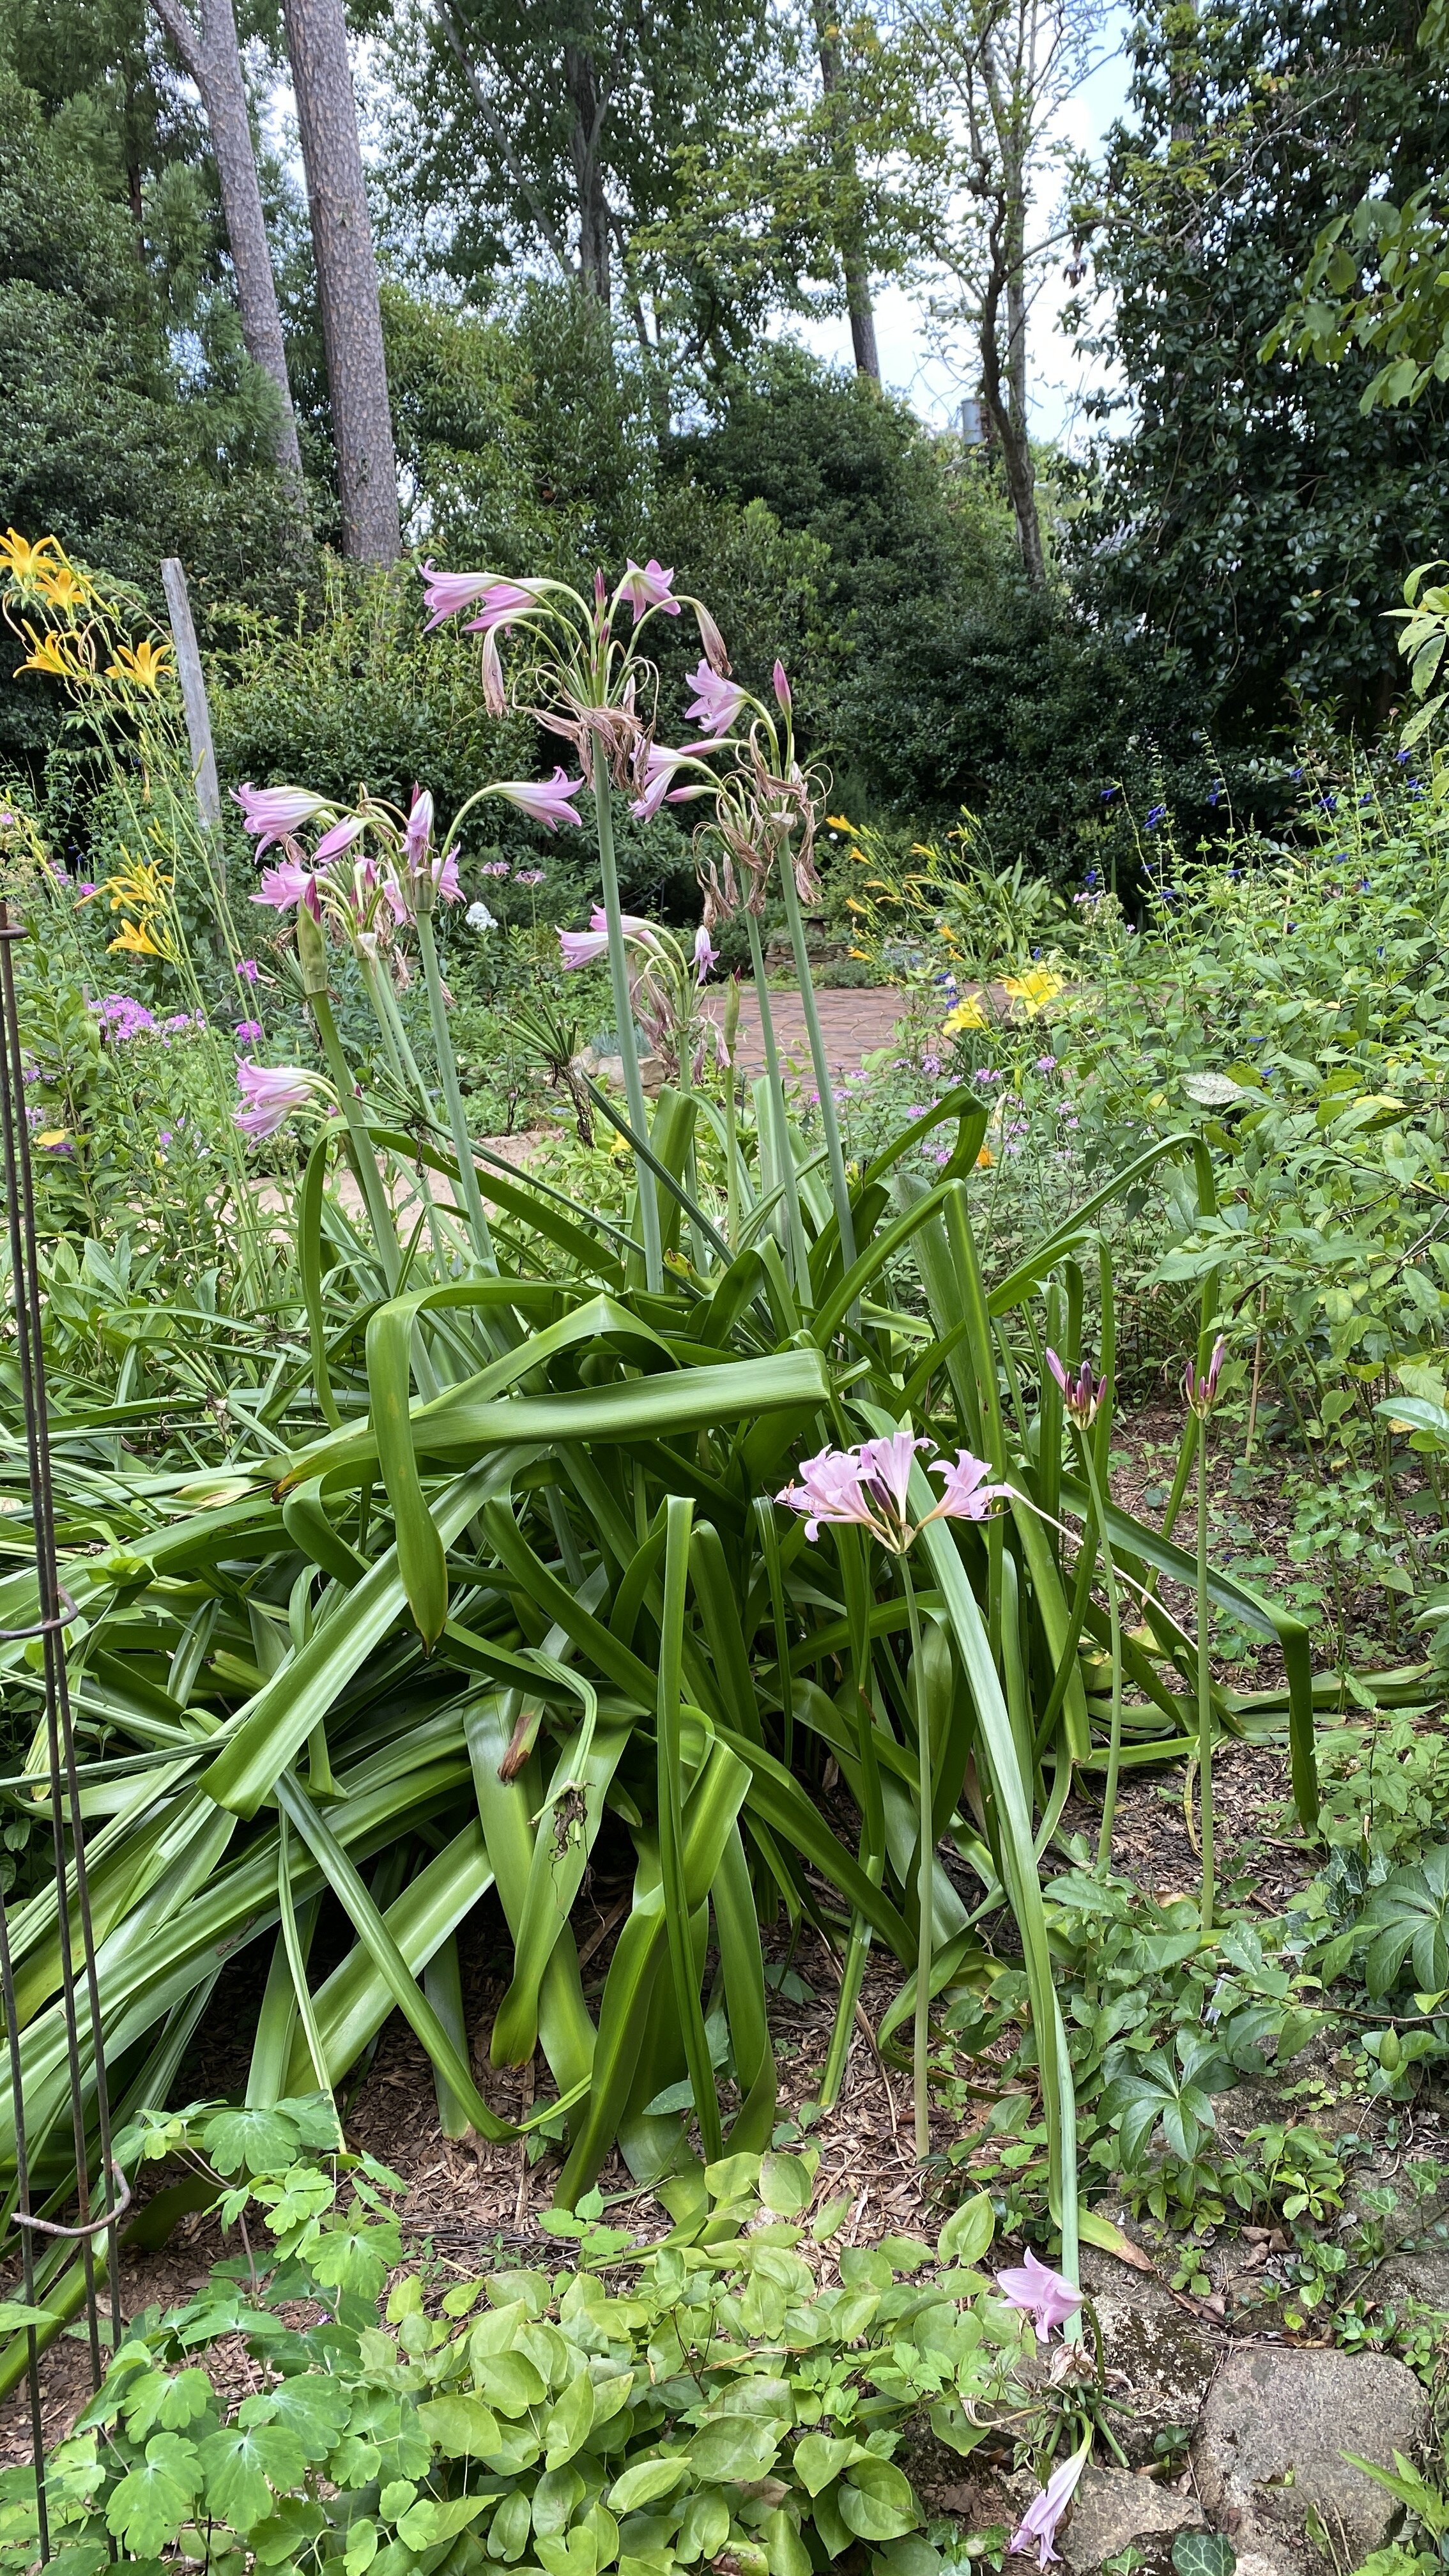   Crinum  ‘Cecil Houdyshel’ just ends its bloom as  Lycoris squamigera  begins. 